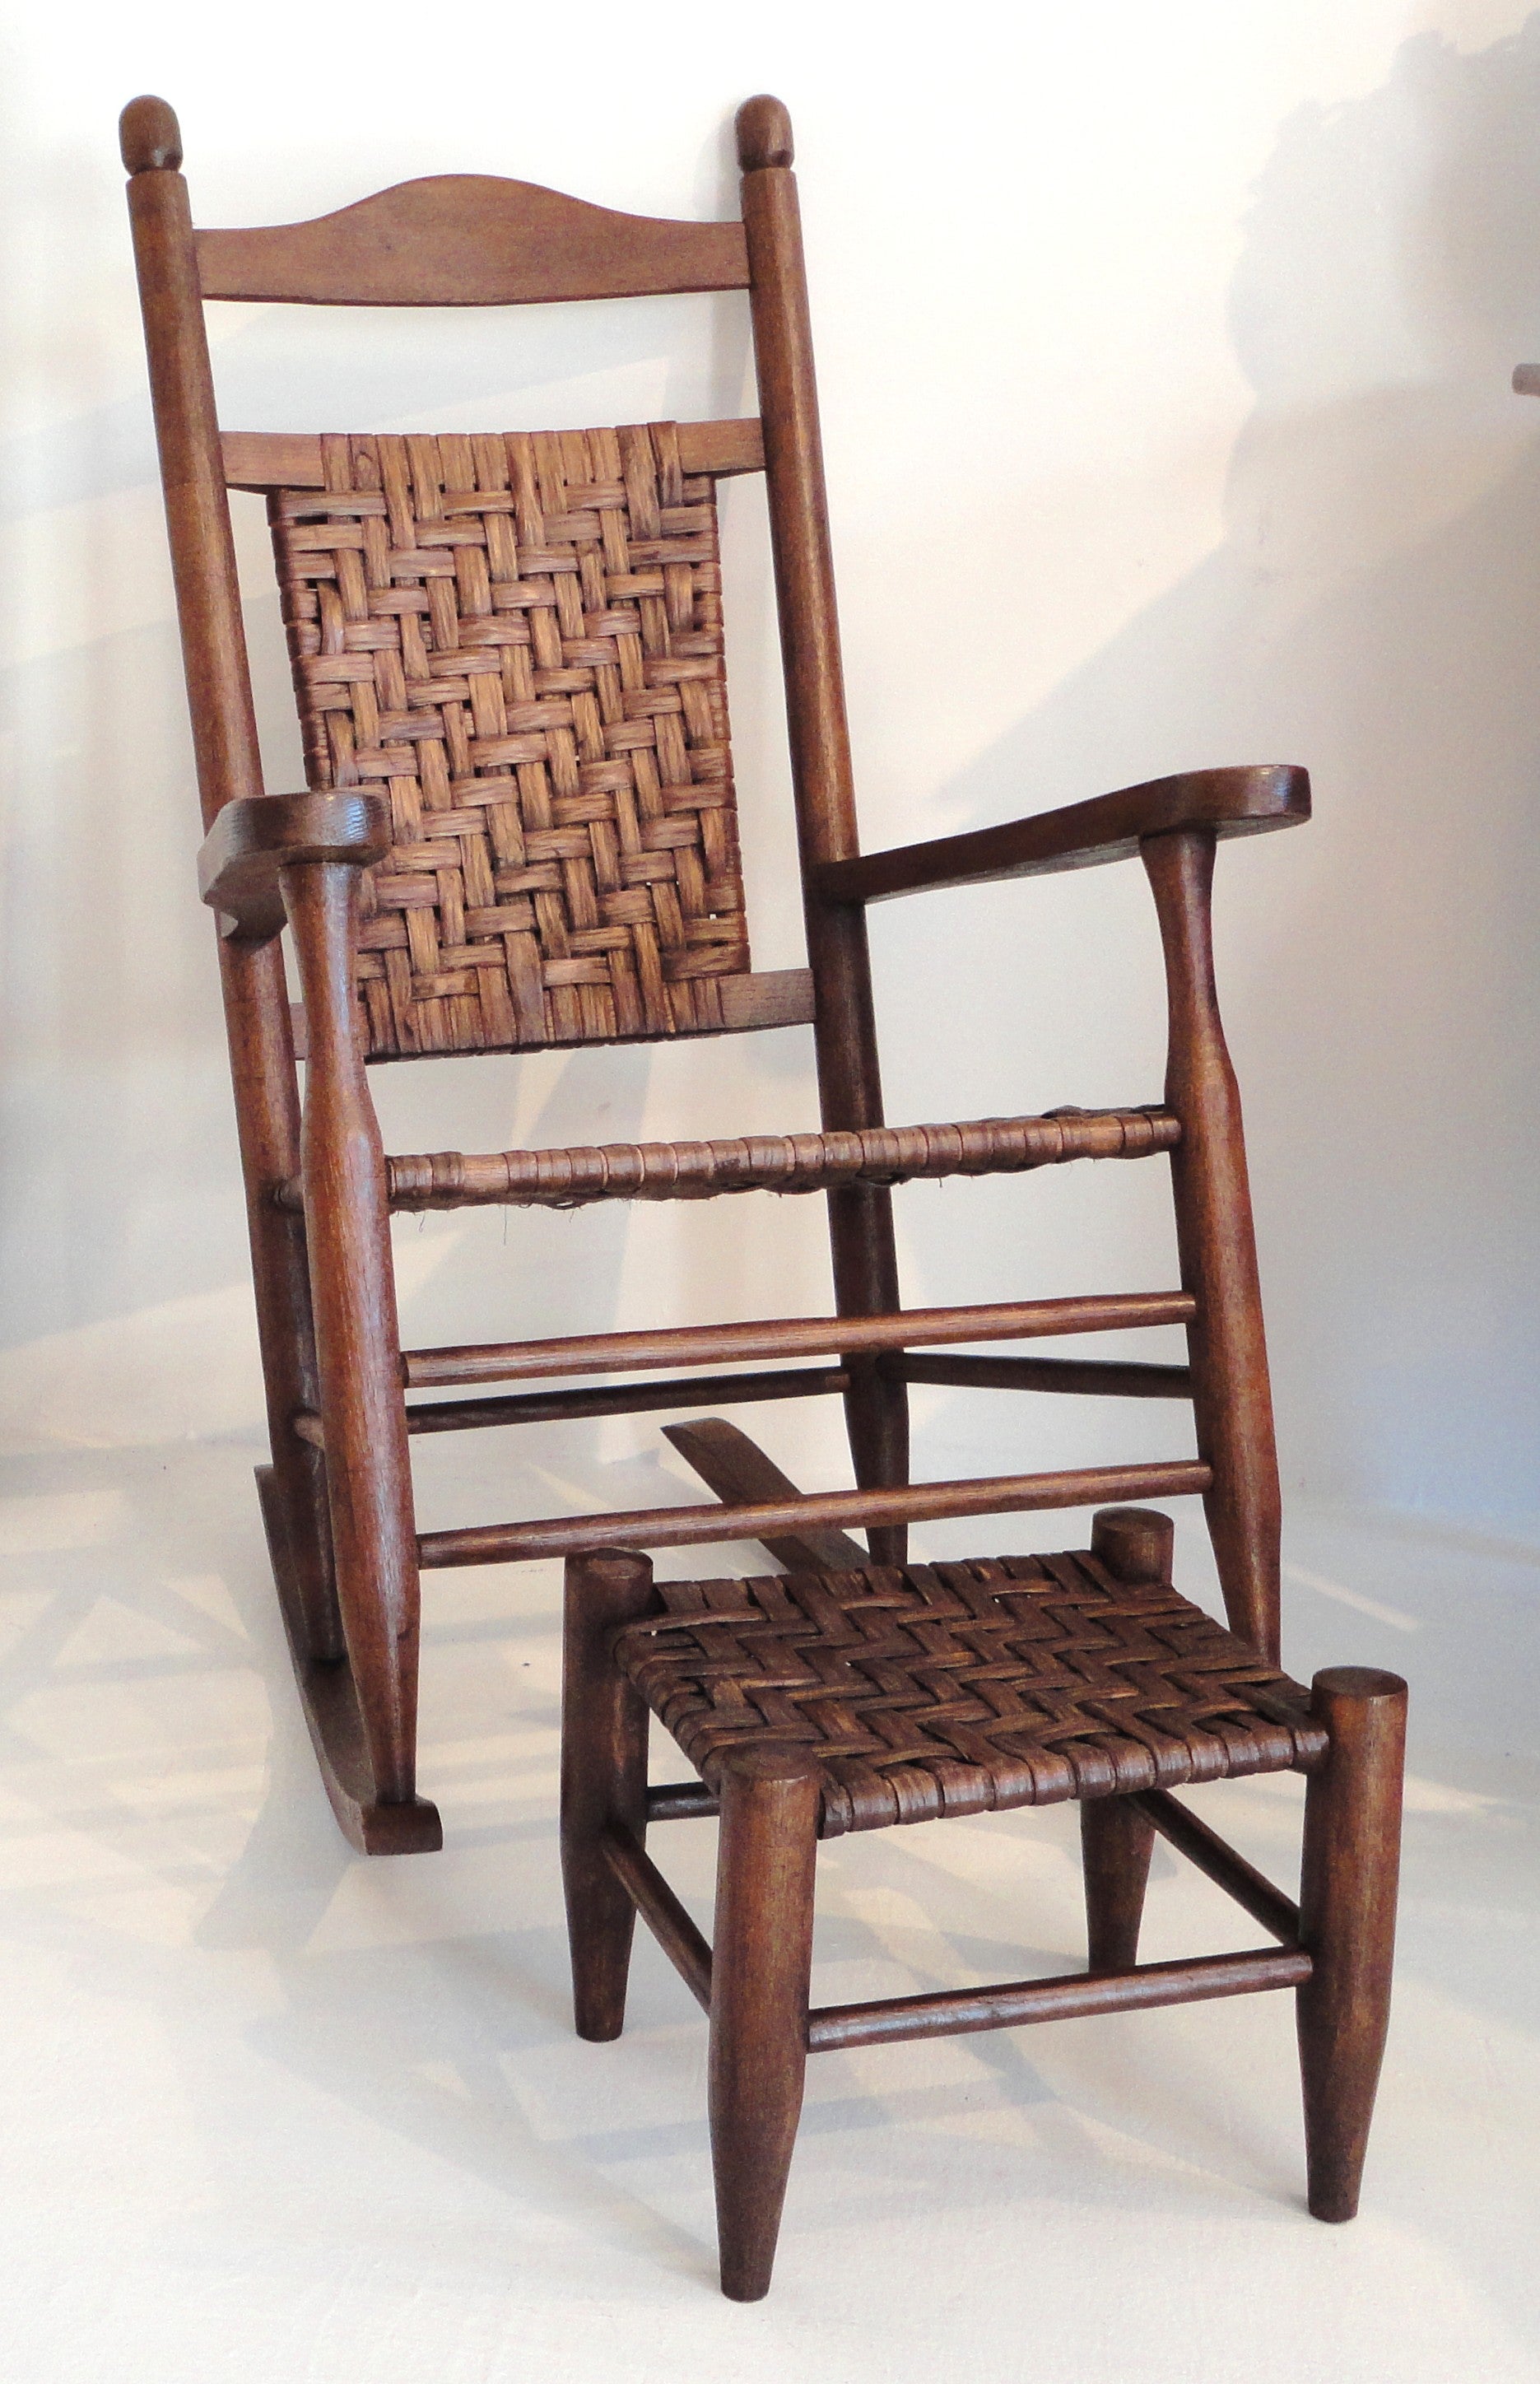 Rustic Hickory Rocking Chair With Matching Foot Stool